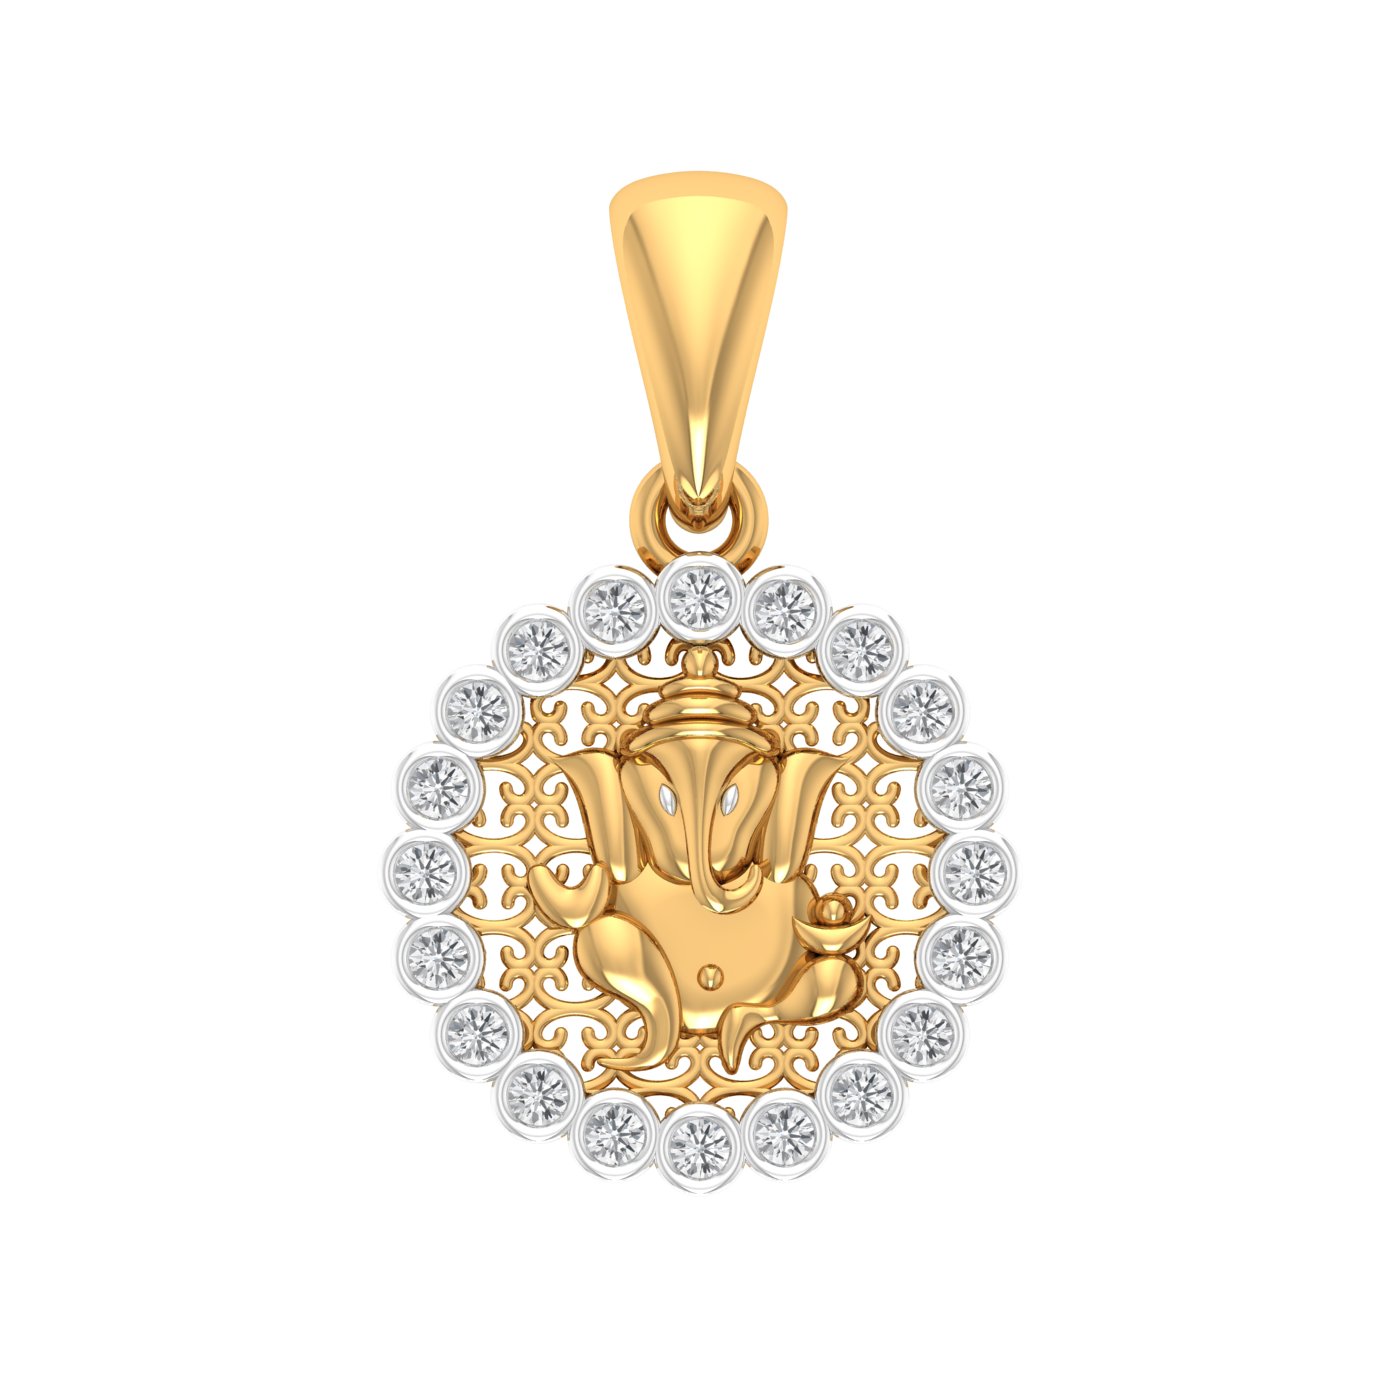 10 Exclusive Lord Ganesha Gold Pendant Designs | pendant for him